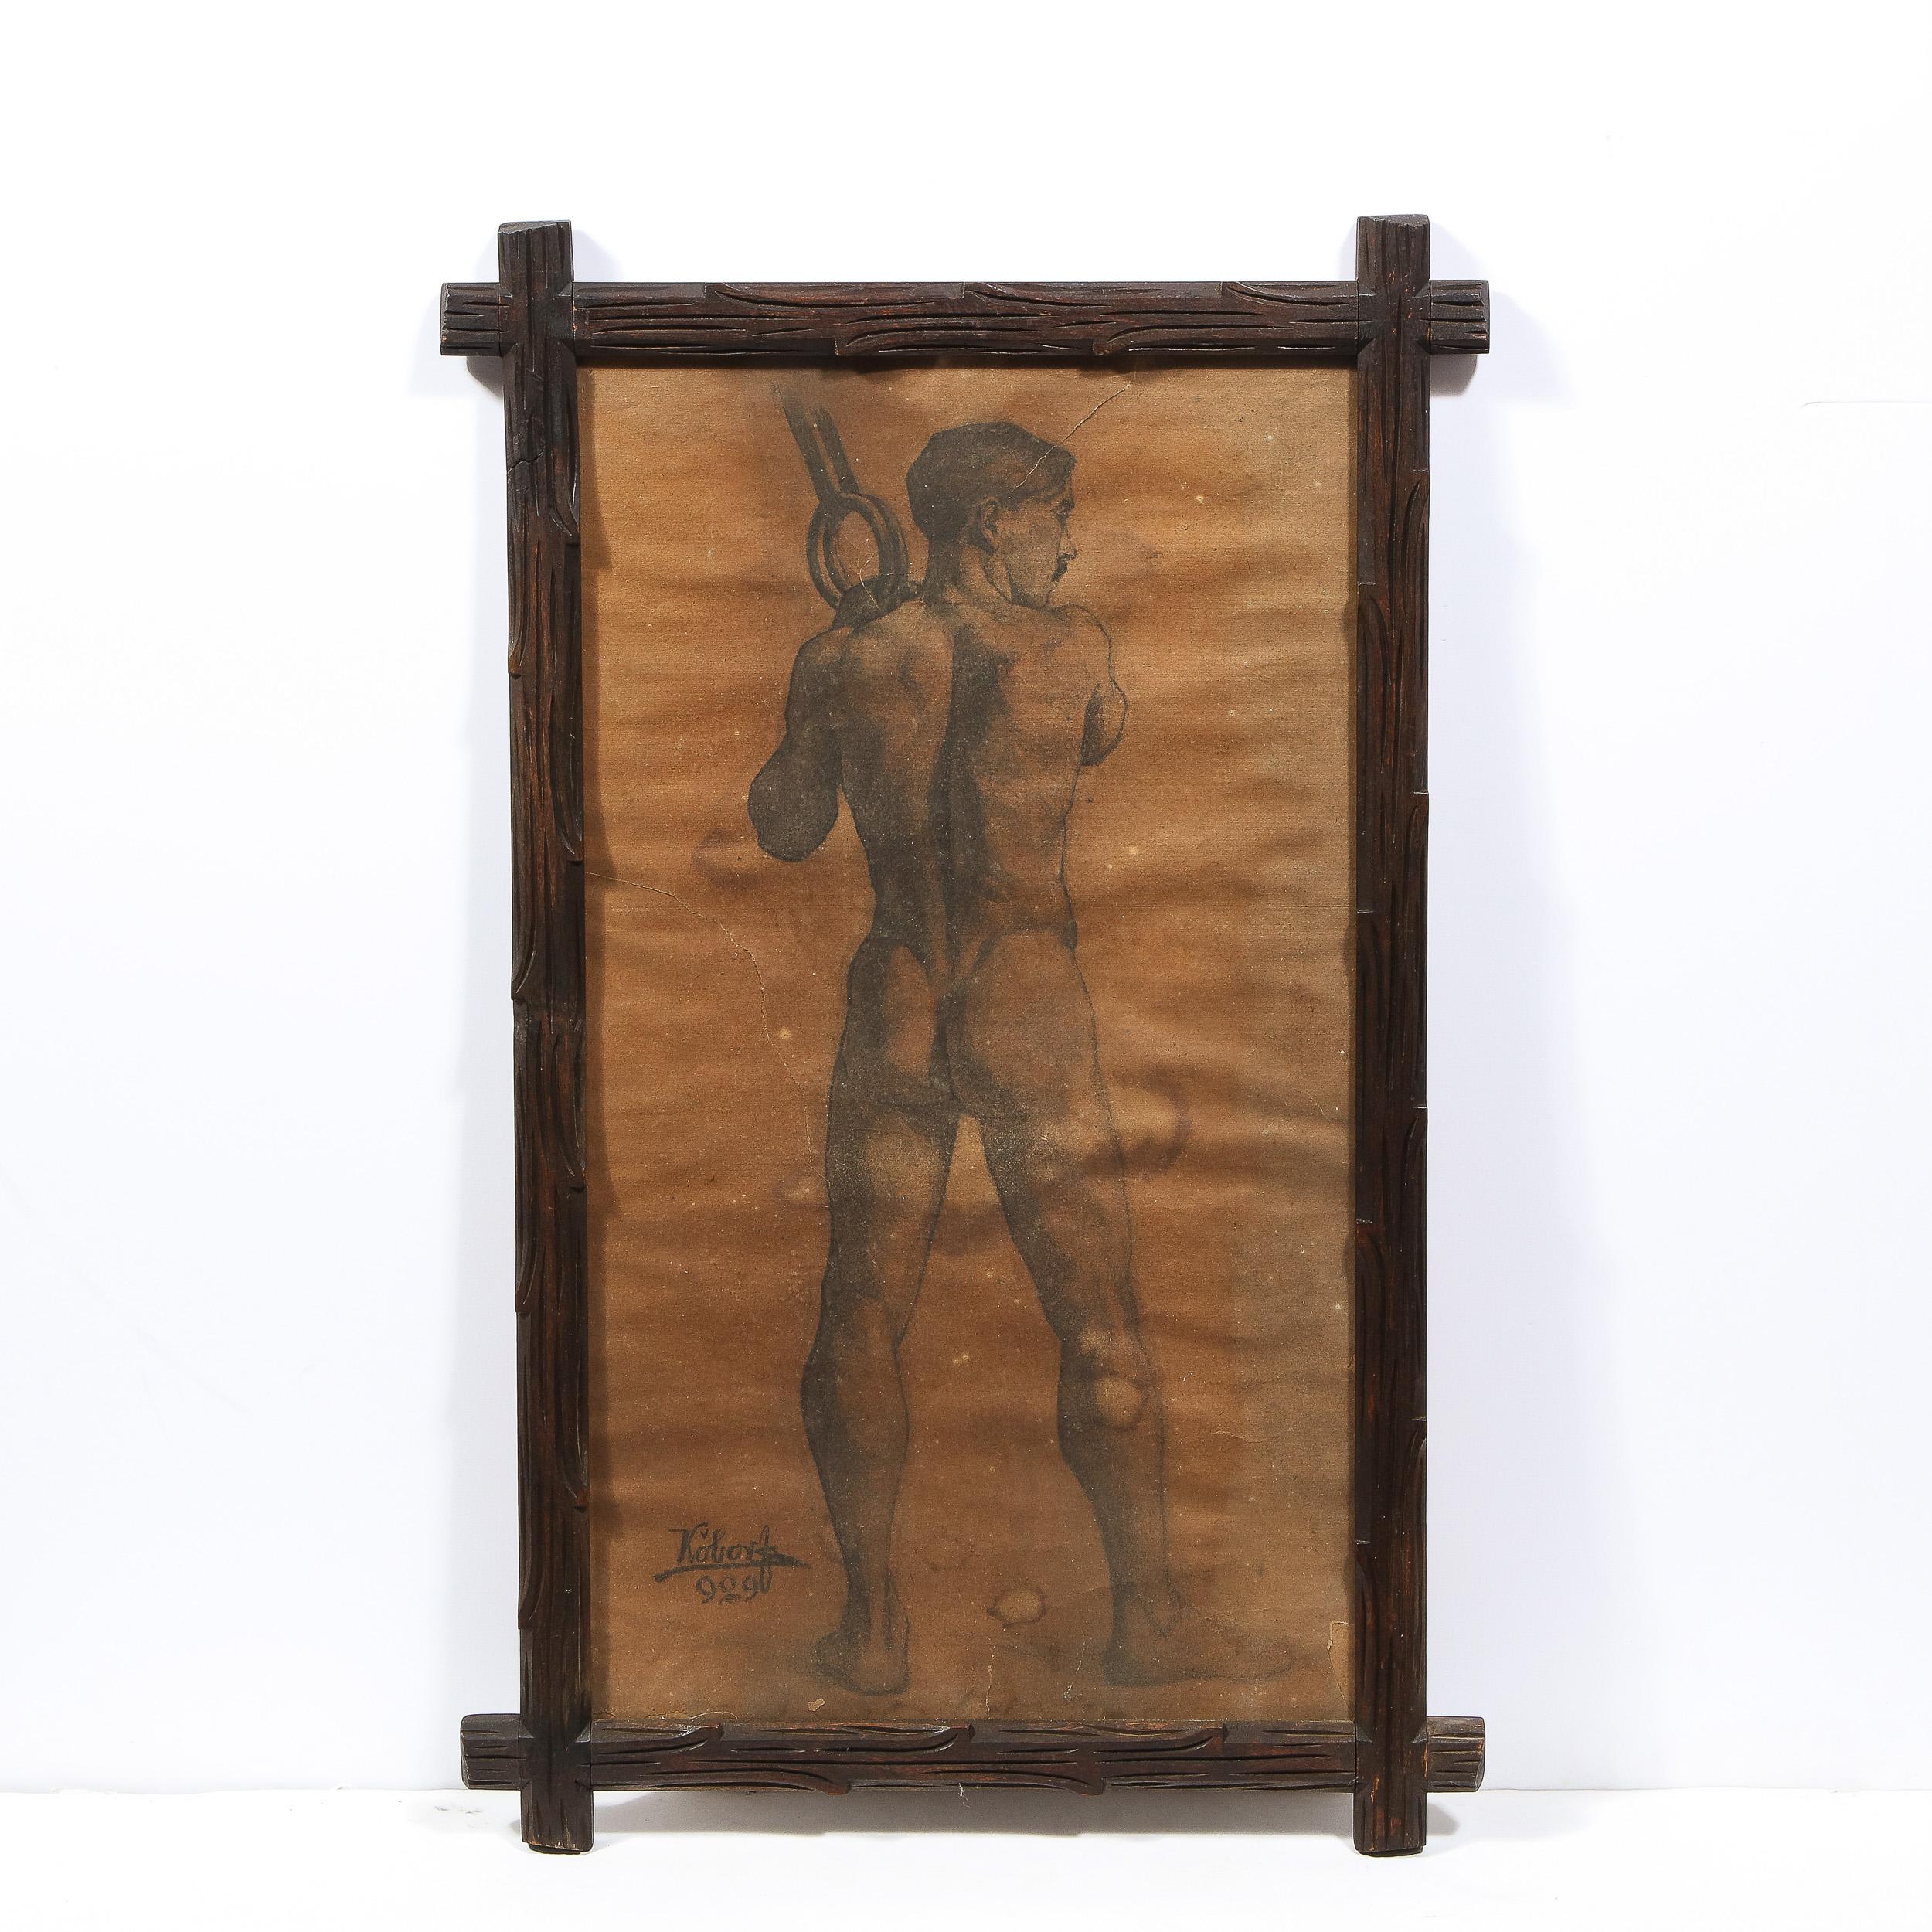 Untitled Nude Male Diptych, Charcoal/ Graphite on Parchment by Henrik Kóbor  - Art by Henrik Kobor